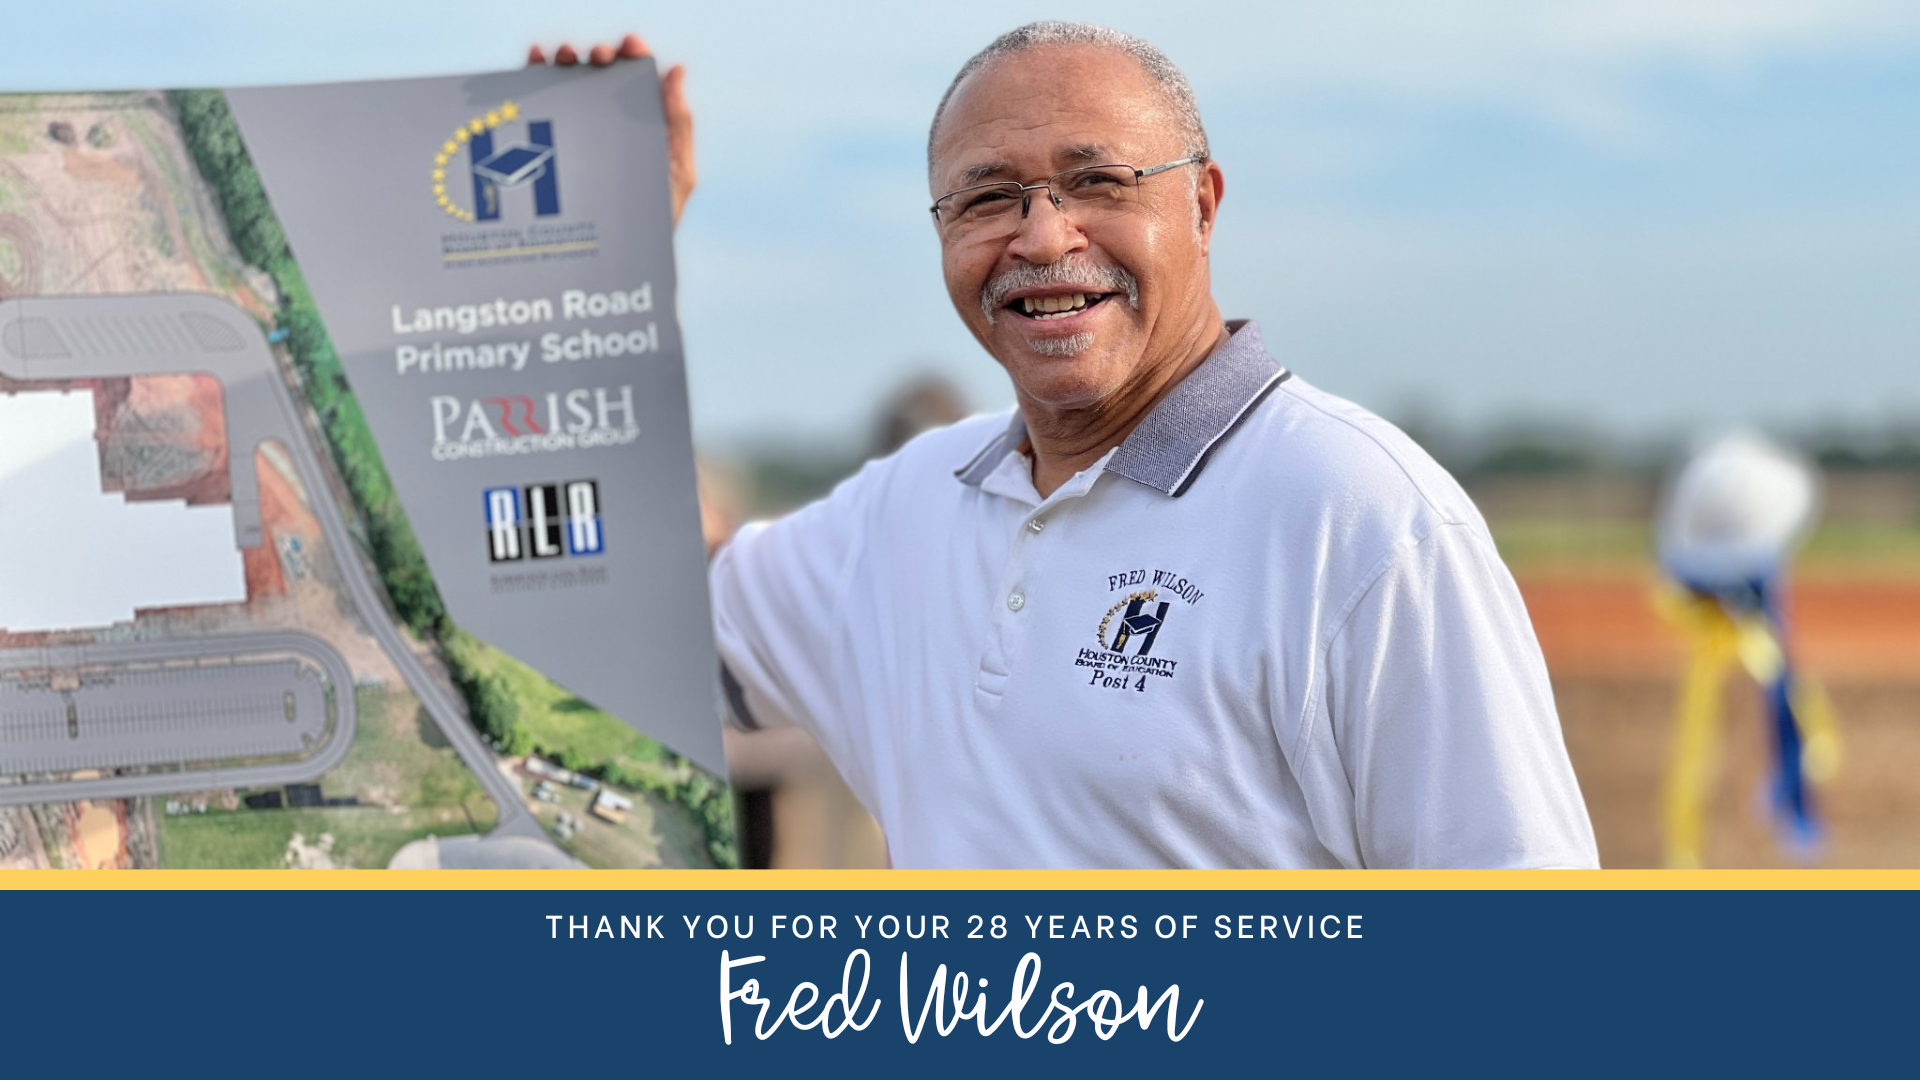 Chairman Fred Wilson - 28 years of Service